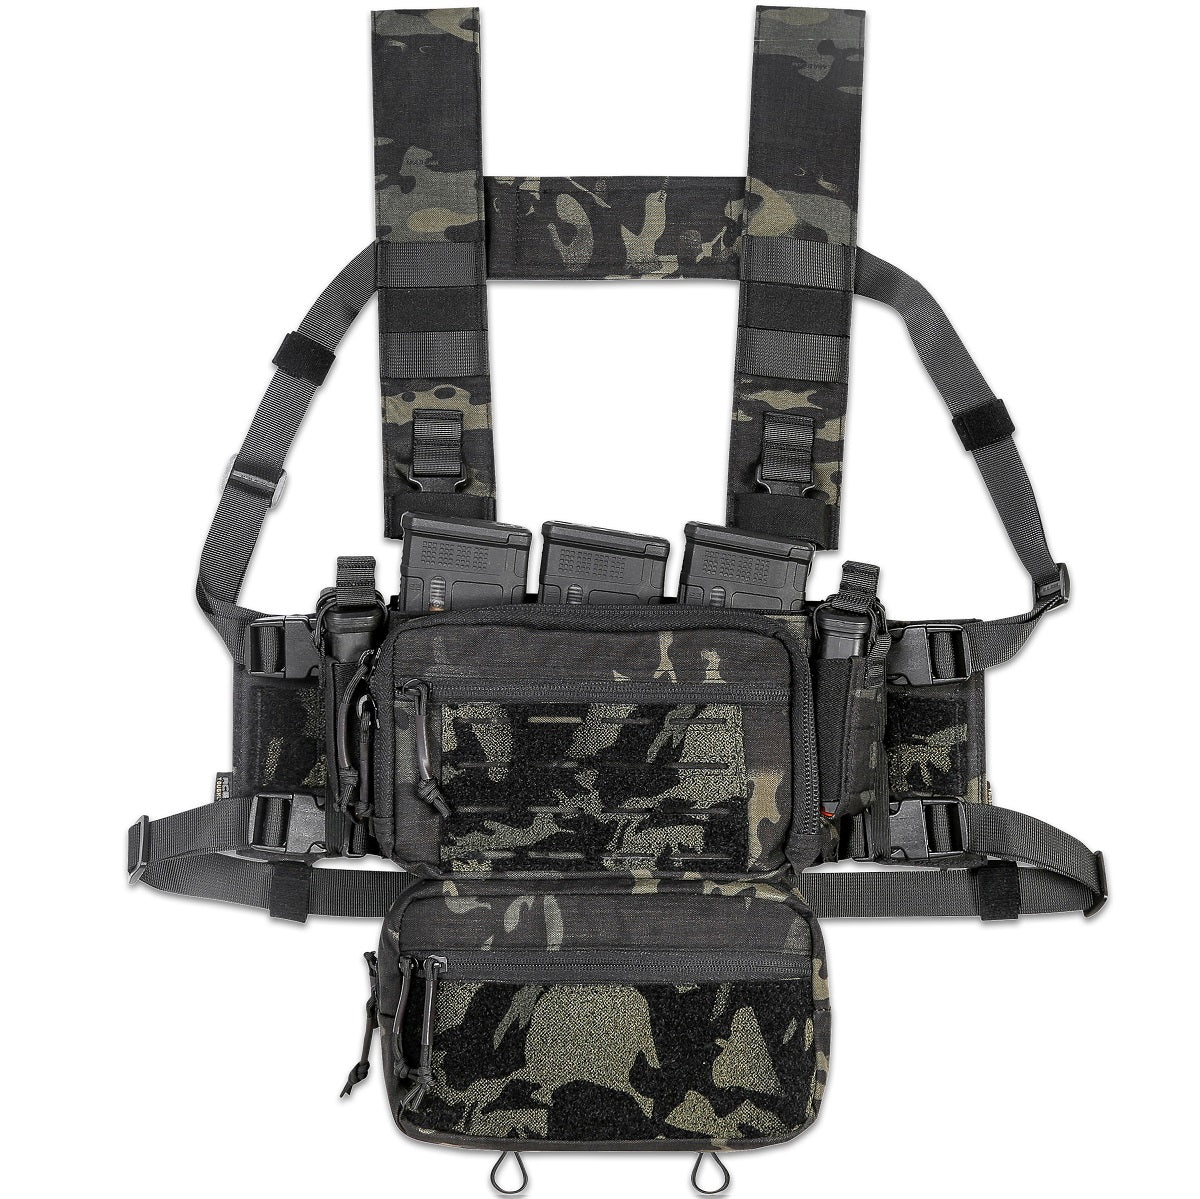 Experience Ultimate Versatility With The S.O.P. Micro Chest Rig